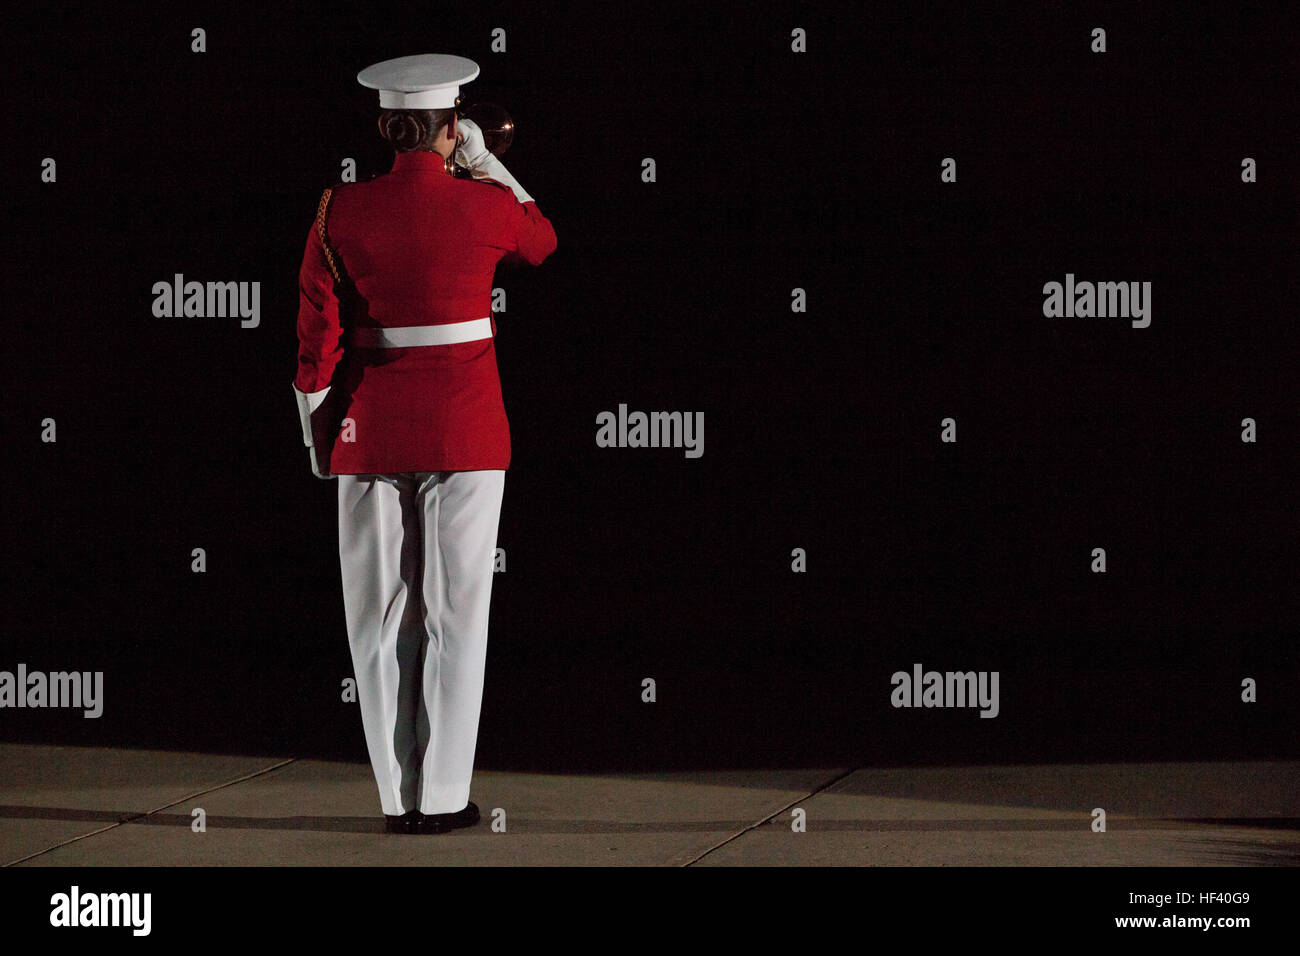 U.S. Marine Corps Staff Sgt. Codie Williams, ceremonial bugler, Marine Barracks Washington (MBW), performs during an evening parade at MBW, Washington, D.C., May 20, 2016. The evening parade summer tradition began in 1934 and features the Silent Drill Platoon, the U.S. Marine Band, the U.S. Marine Drum and Bugle Corps and two marching companies. More than 3,500 guests attend the parade every week. (U.S. Marine Corps photo by Lance Cpl. Hailey D. Stuart/Released) Marine Barracks Washington Evening Parade May 20, 2016 160520-M-LR229-154 Stock Photo